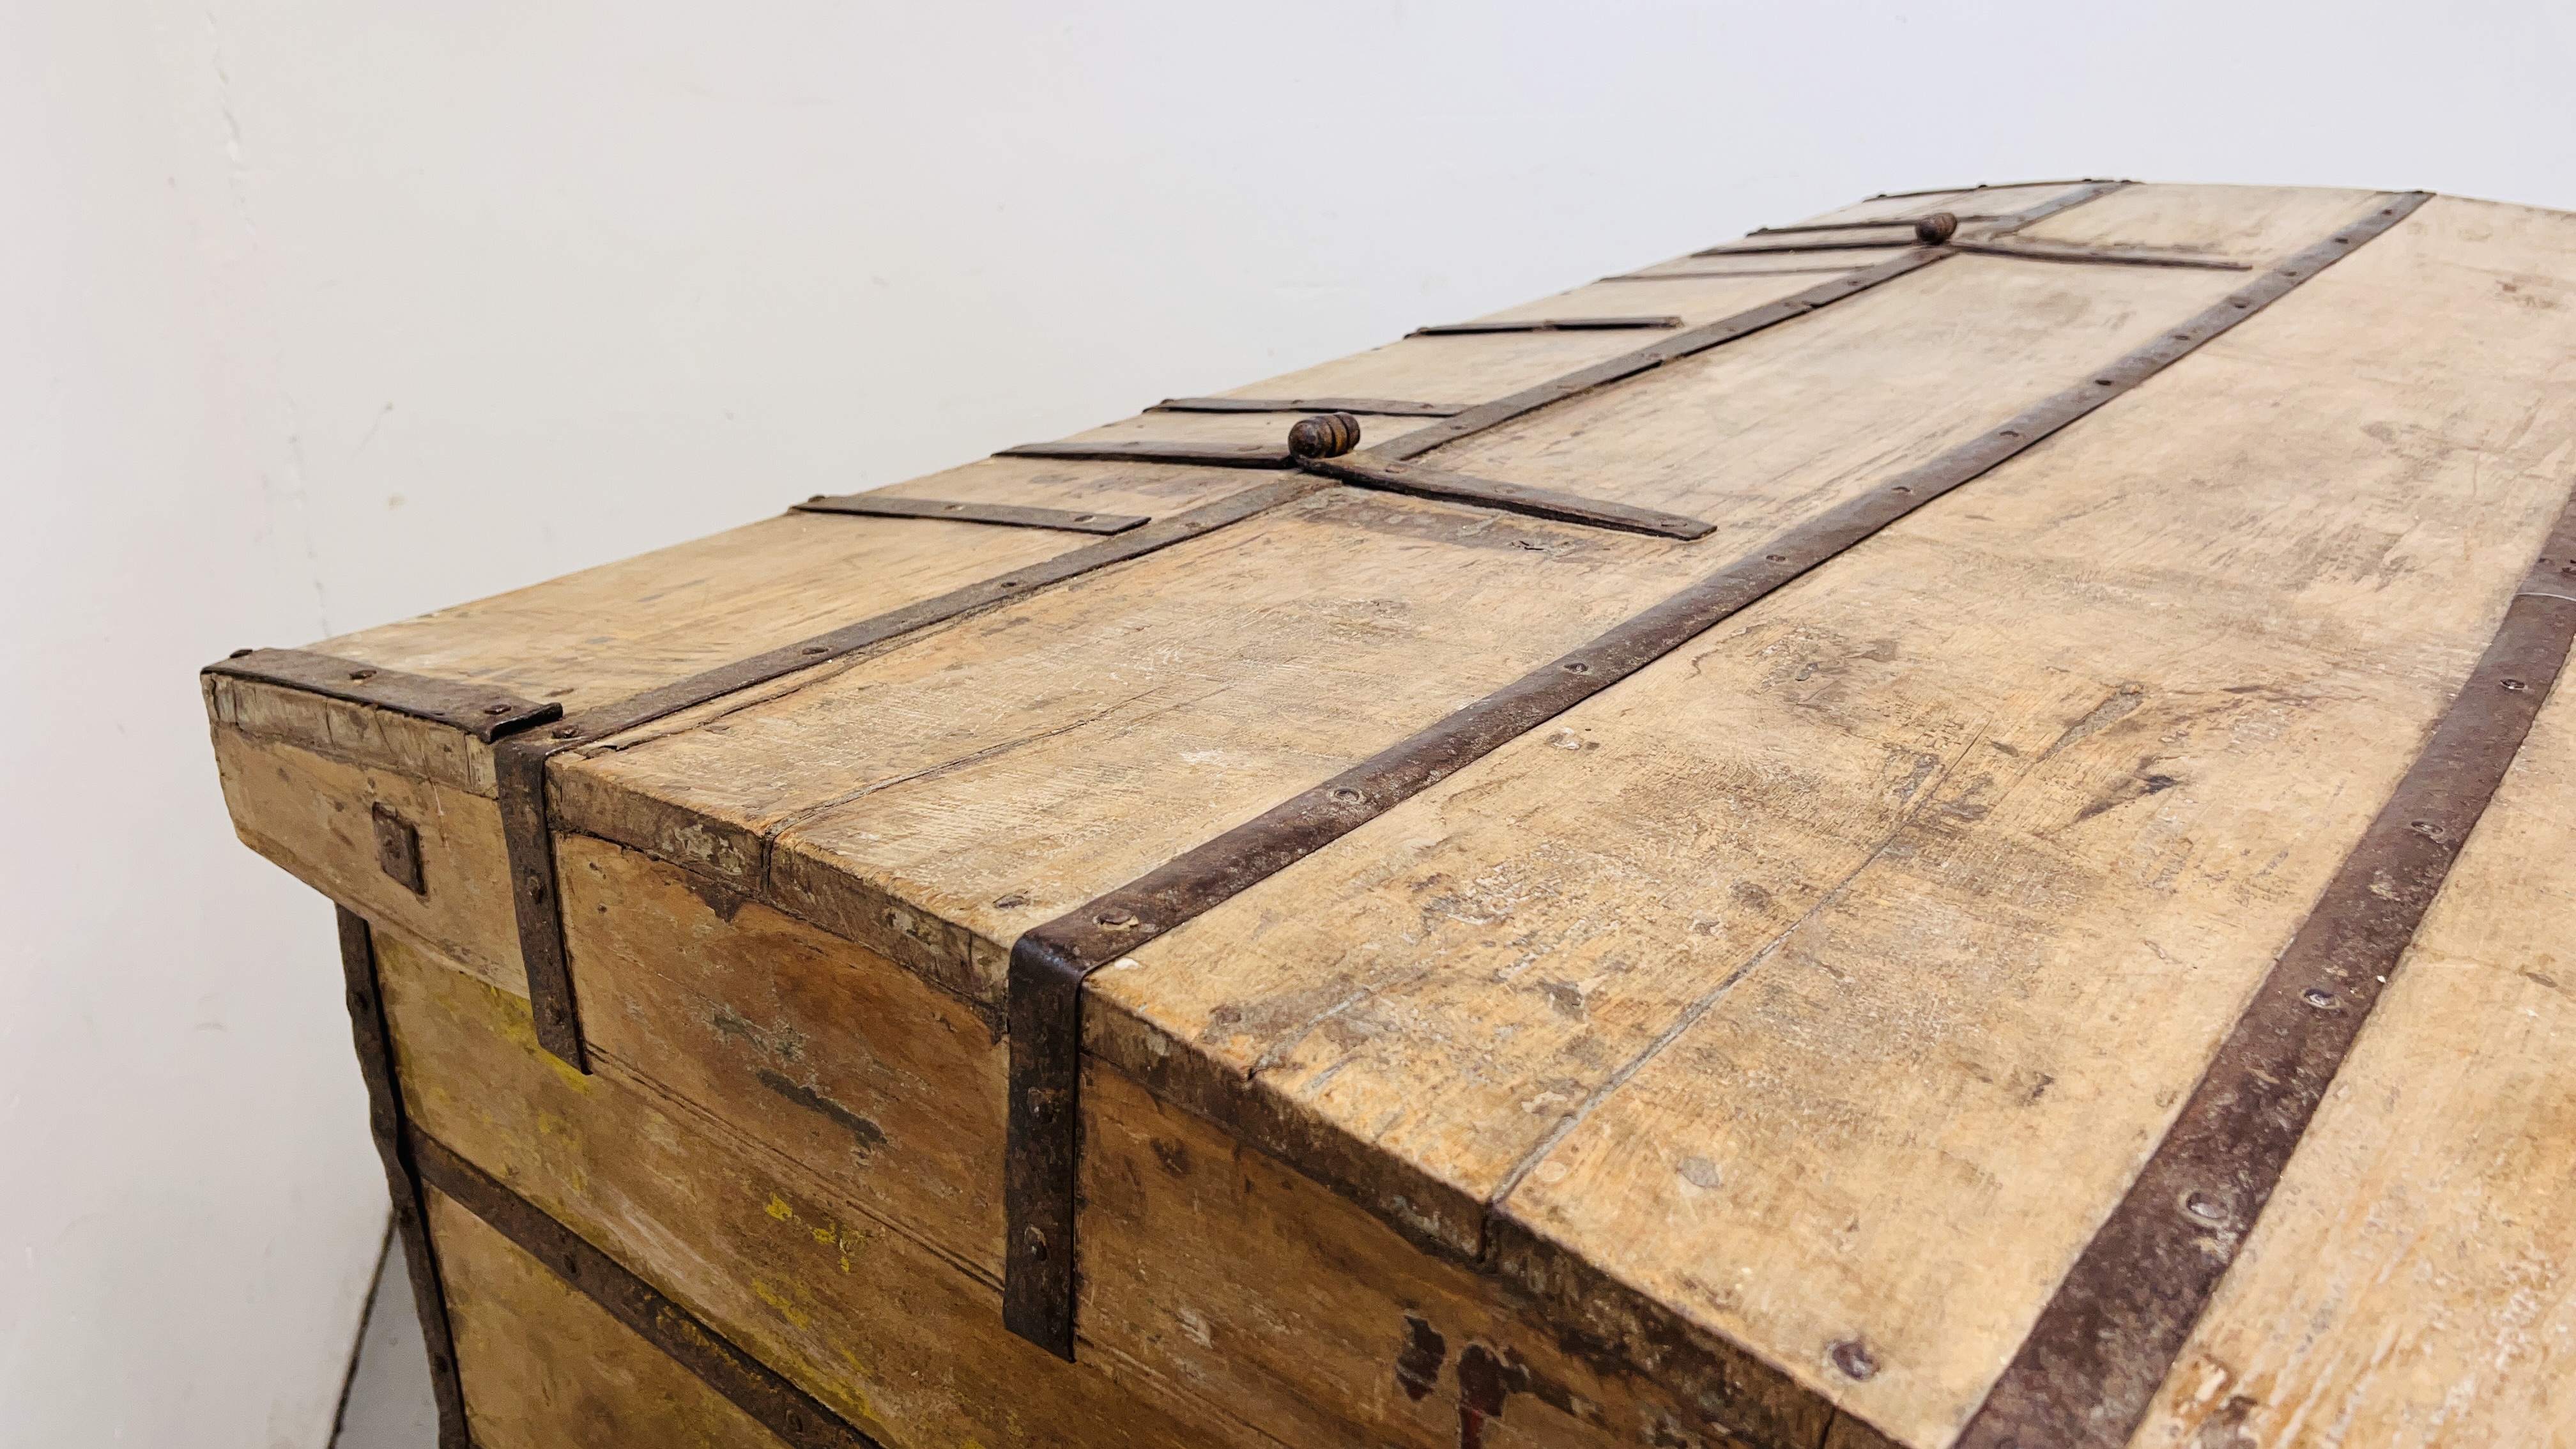 AN EXTREMELY LARGE RAJASTHANI 19th CENTURY DOWRY CHEST - 158CM W X 81CM D X 123CM H. - Image 9 of 30